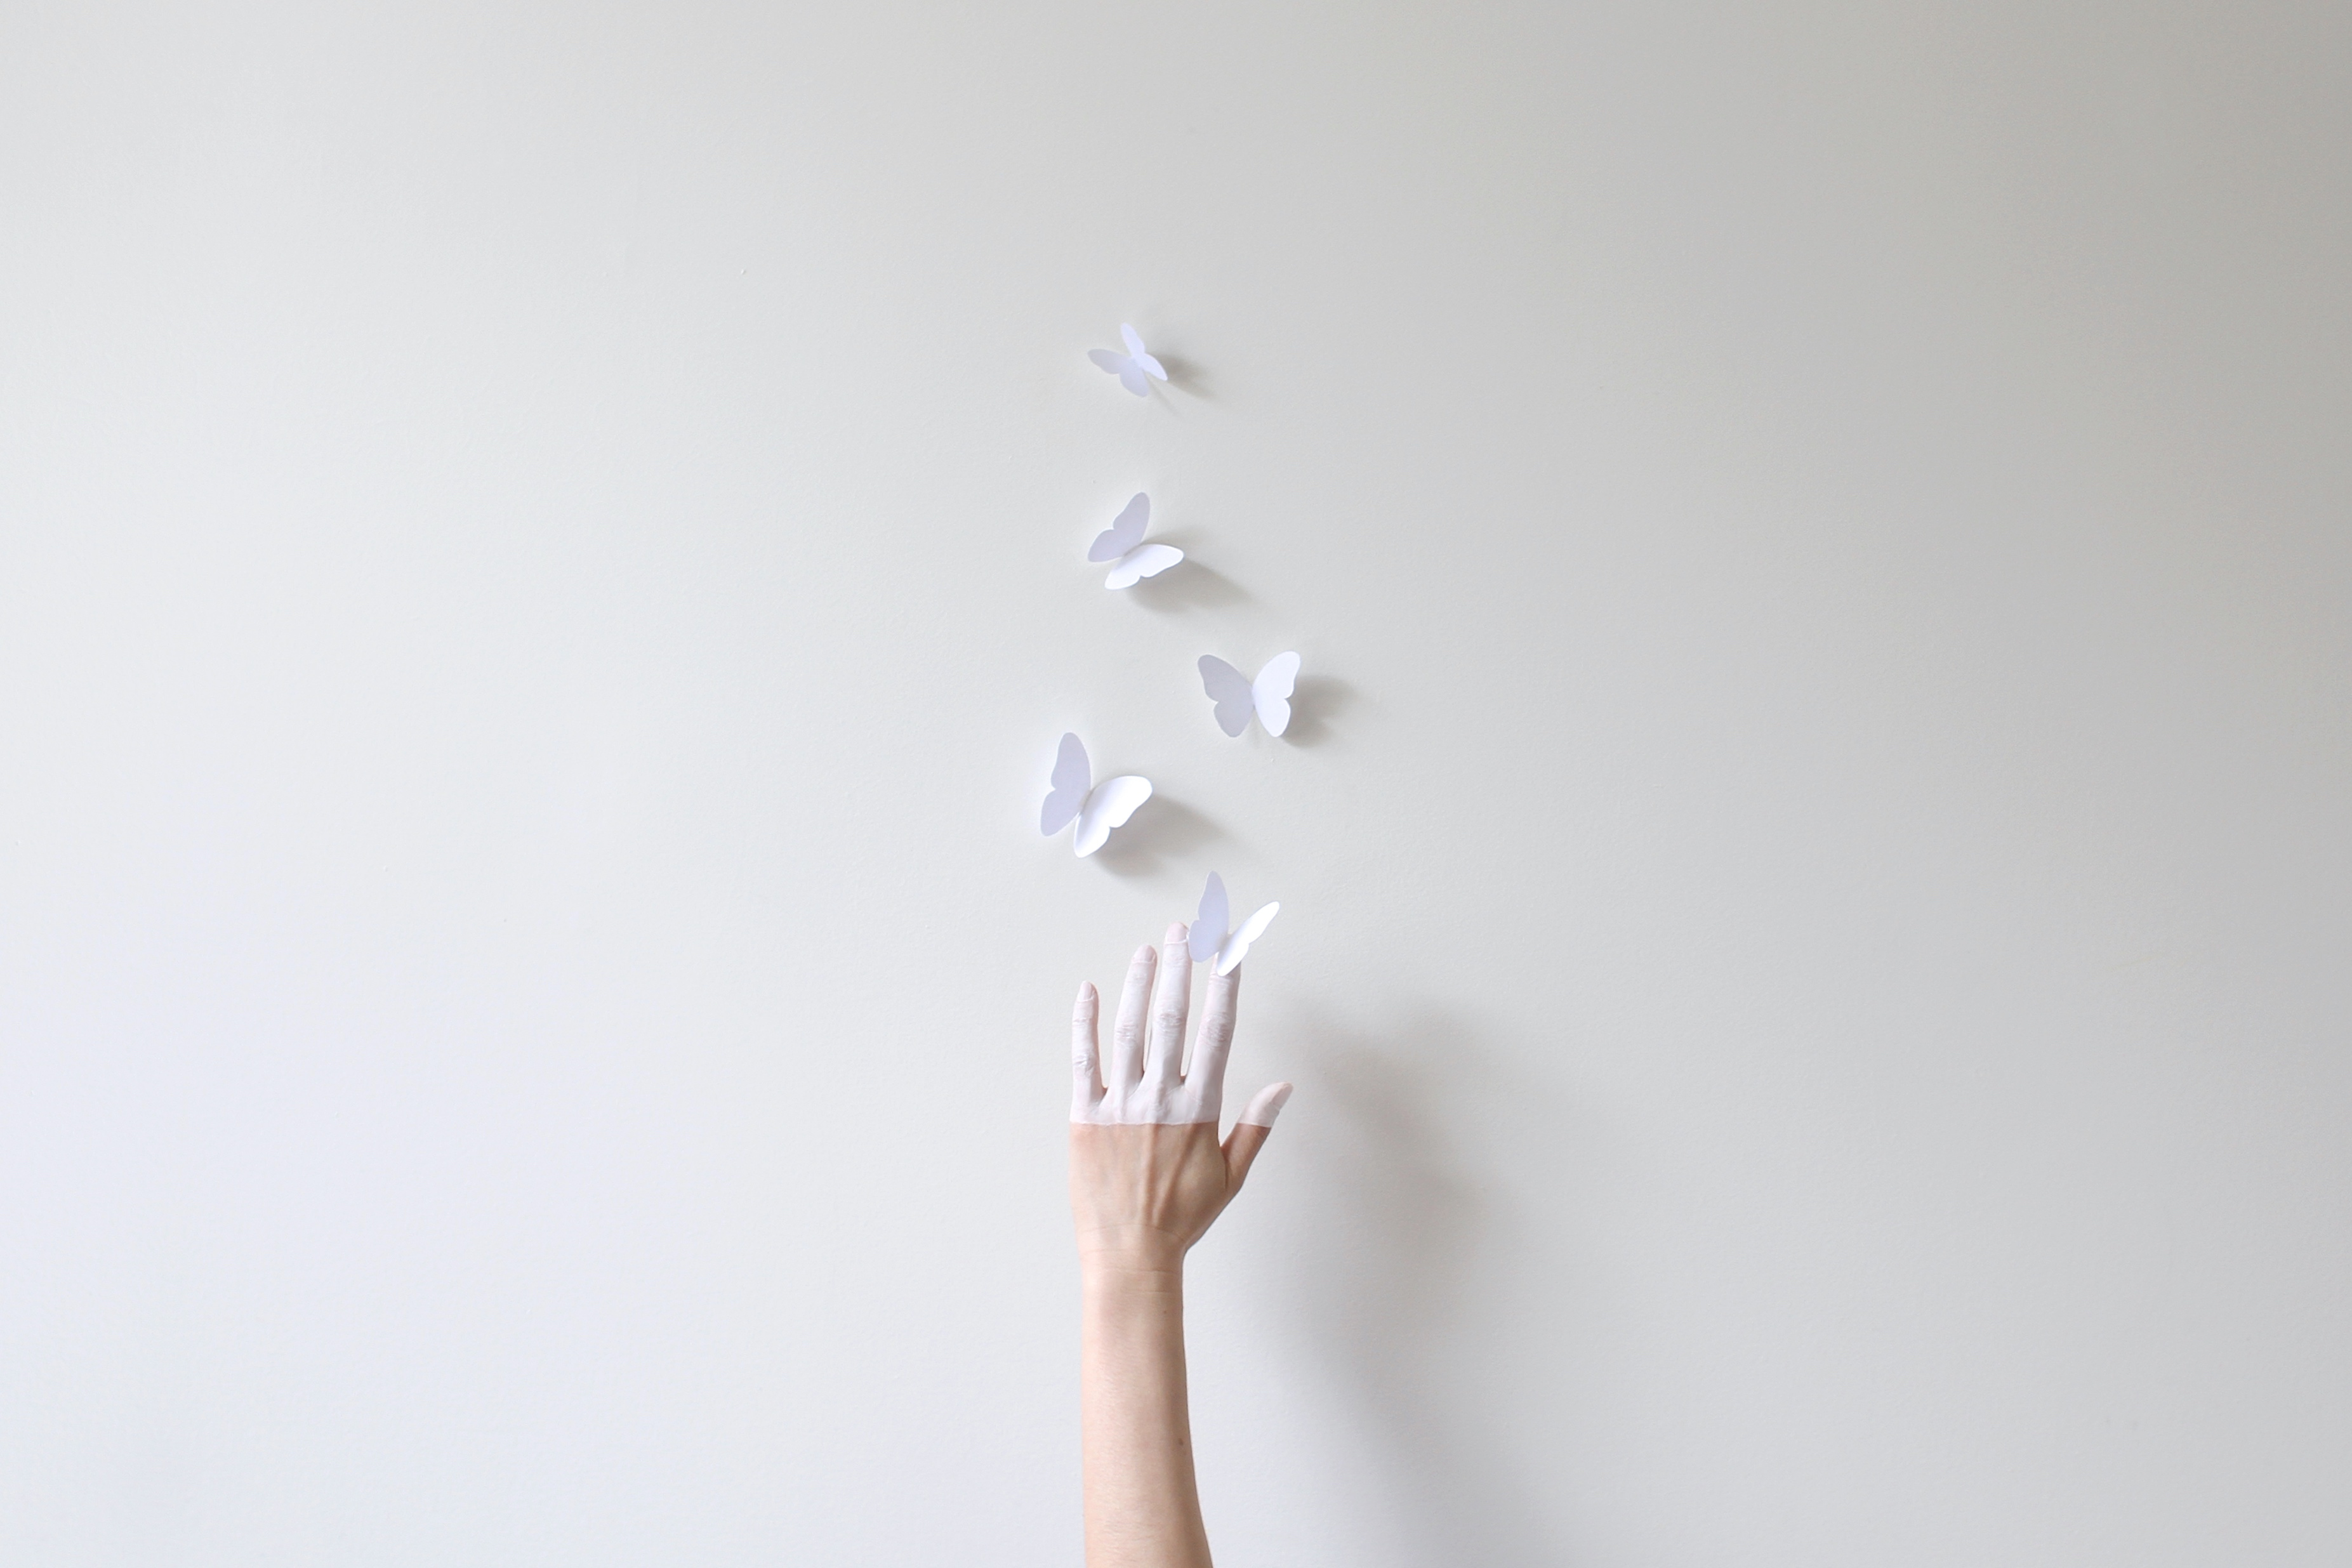 A hand half painted in white reaching up to white paper butterflies against white wall